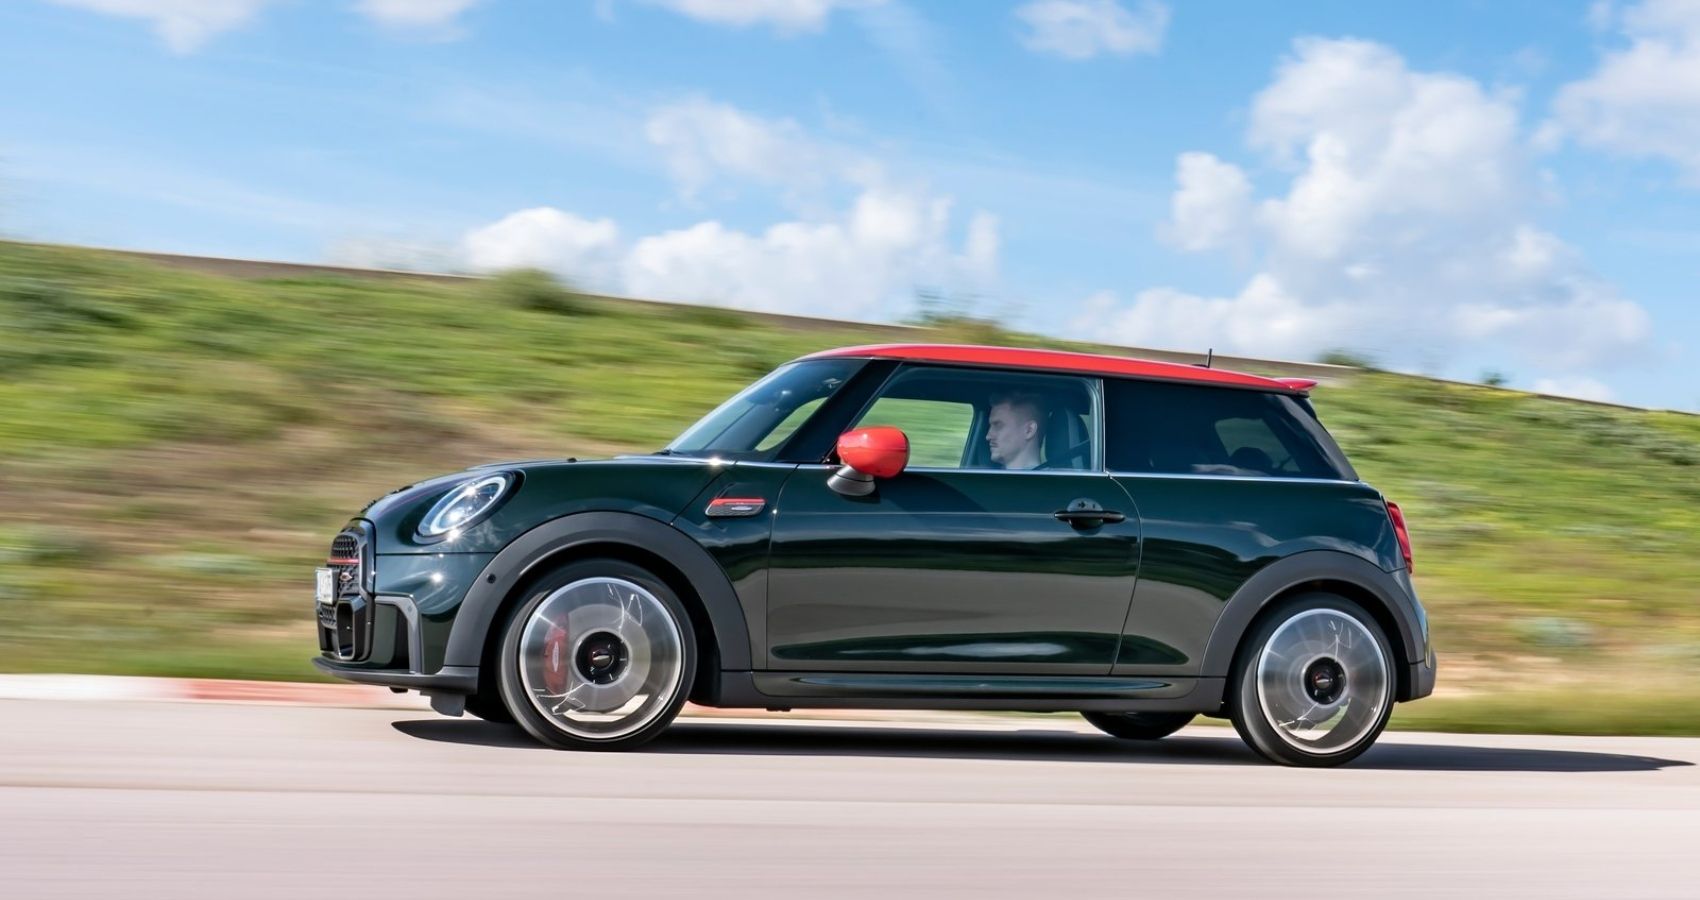 Side profile of the 2022 Mini Cooper JCW in motion